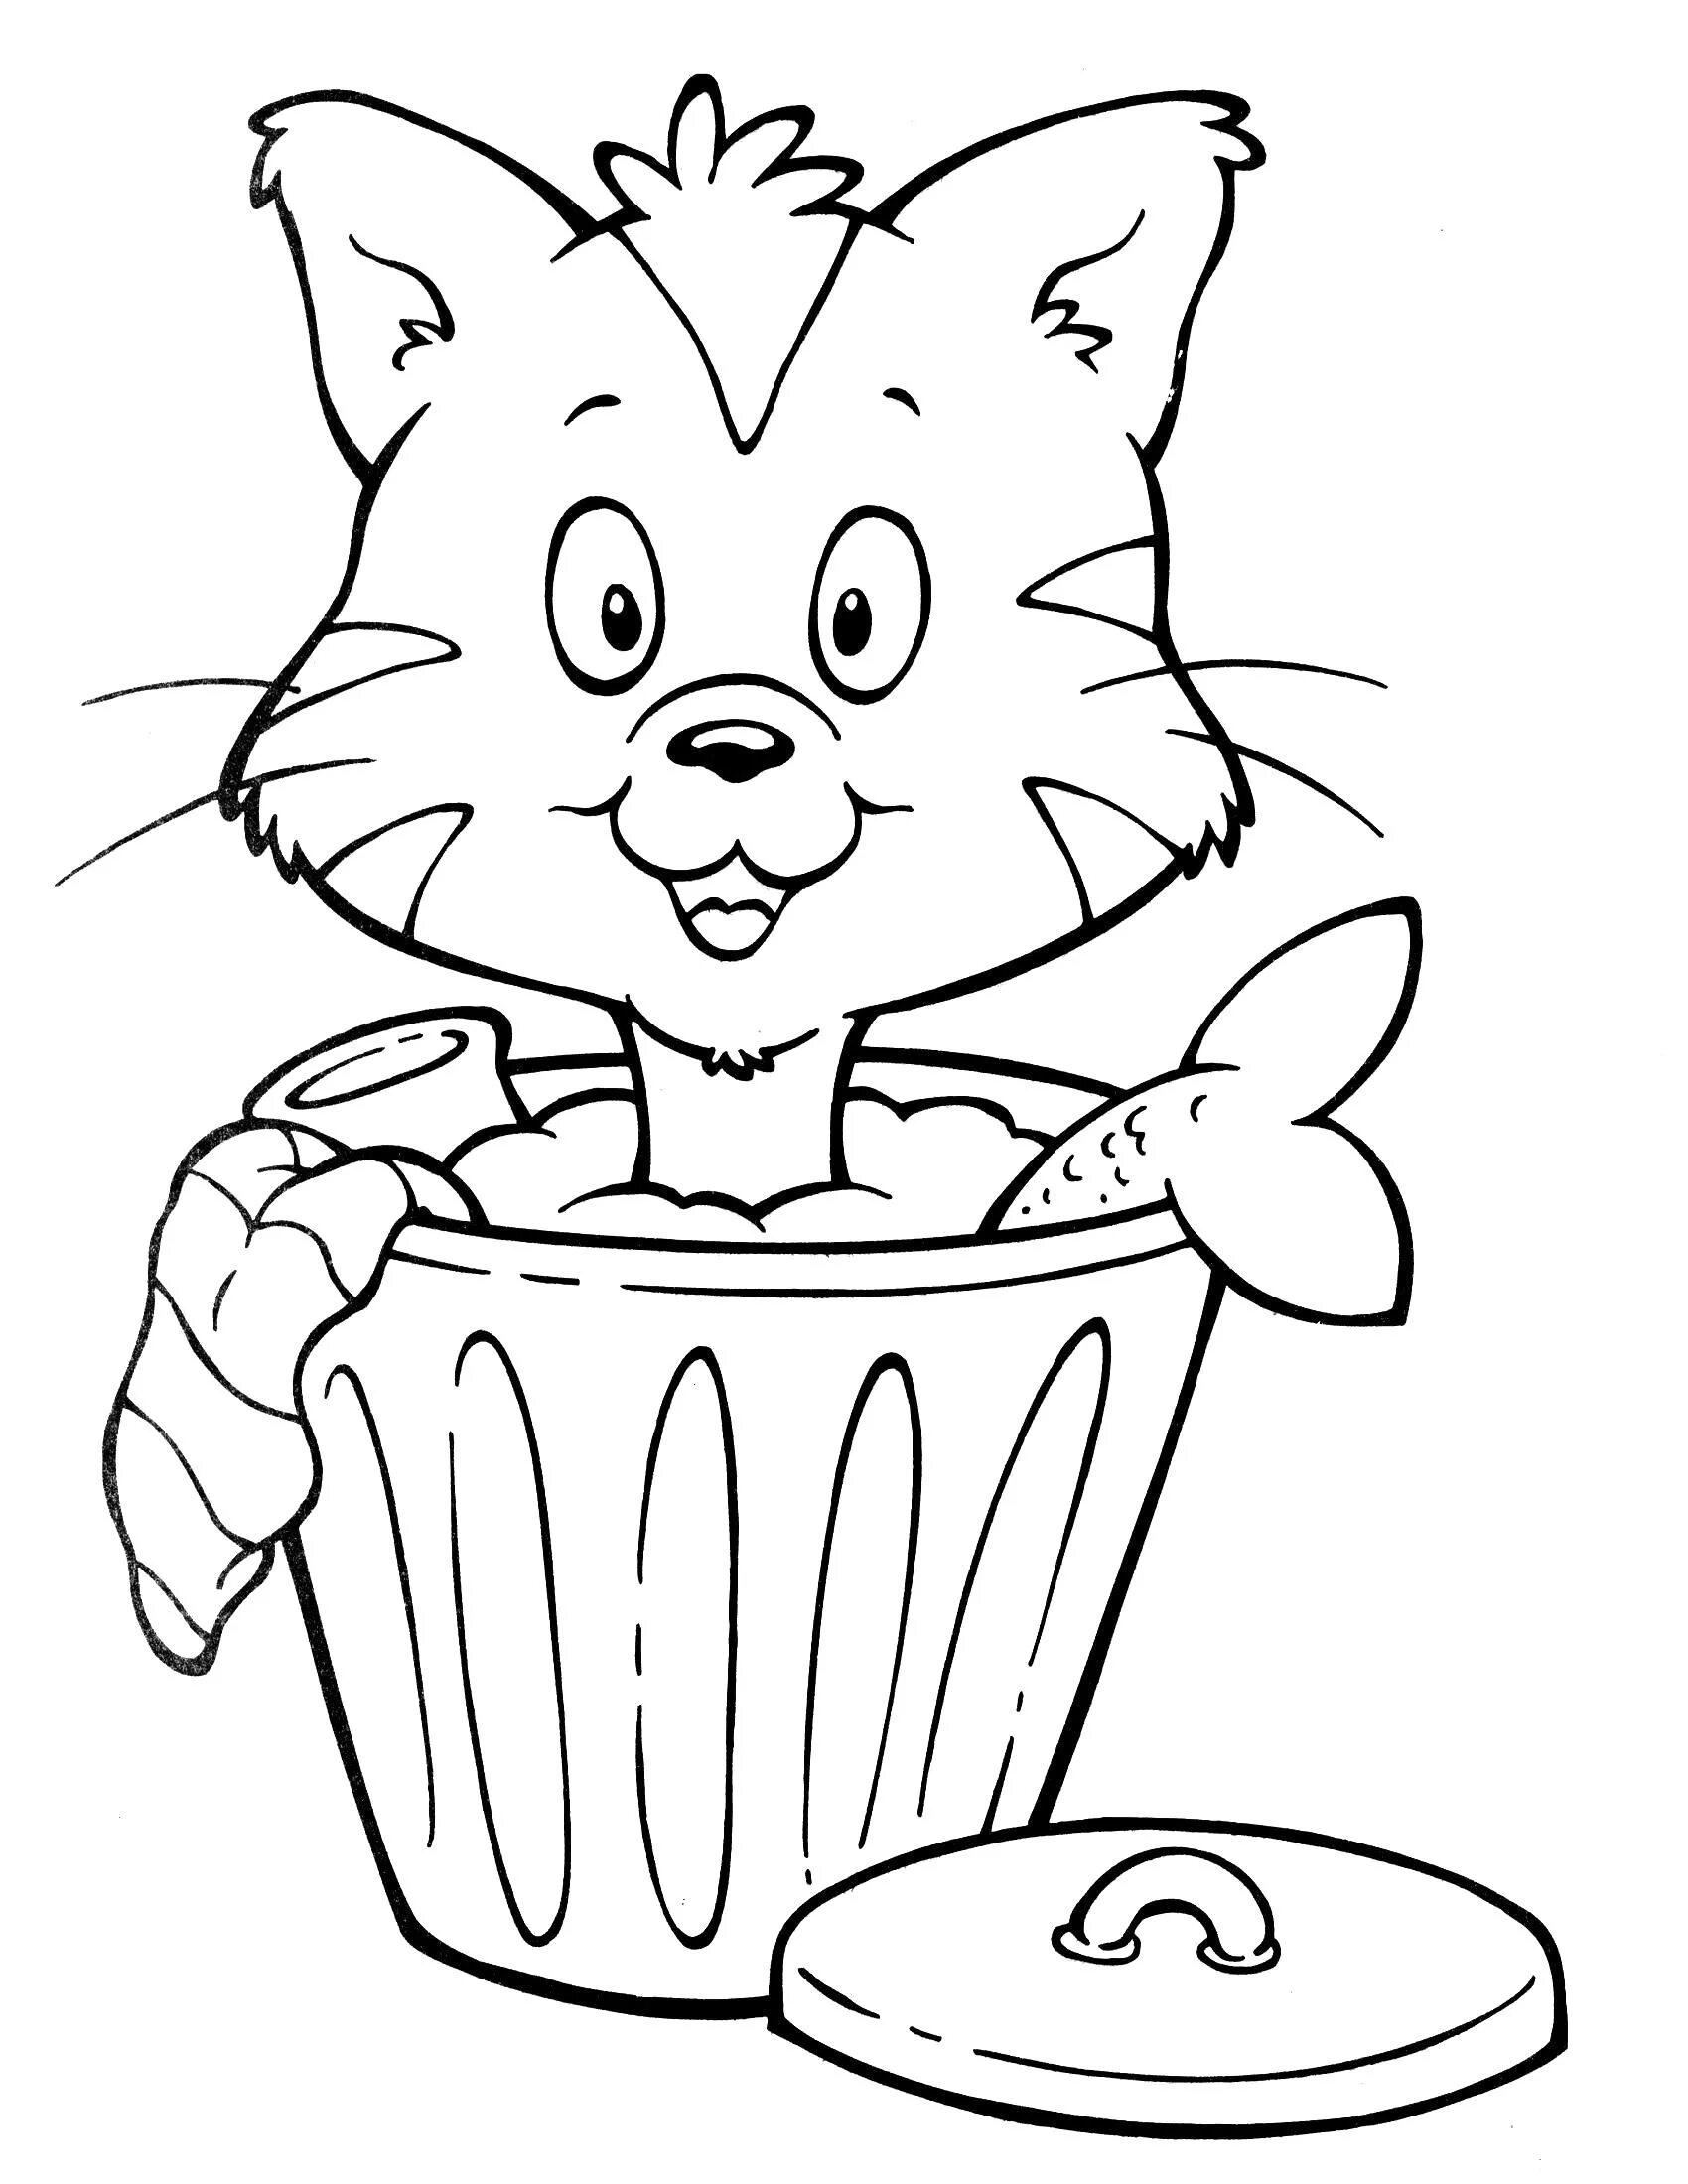 Coloring page puzzled cat in a cup